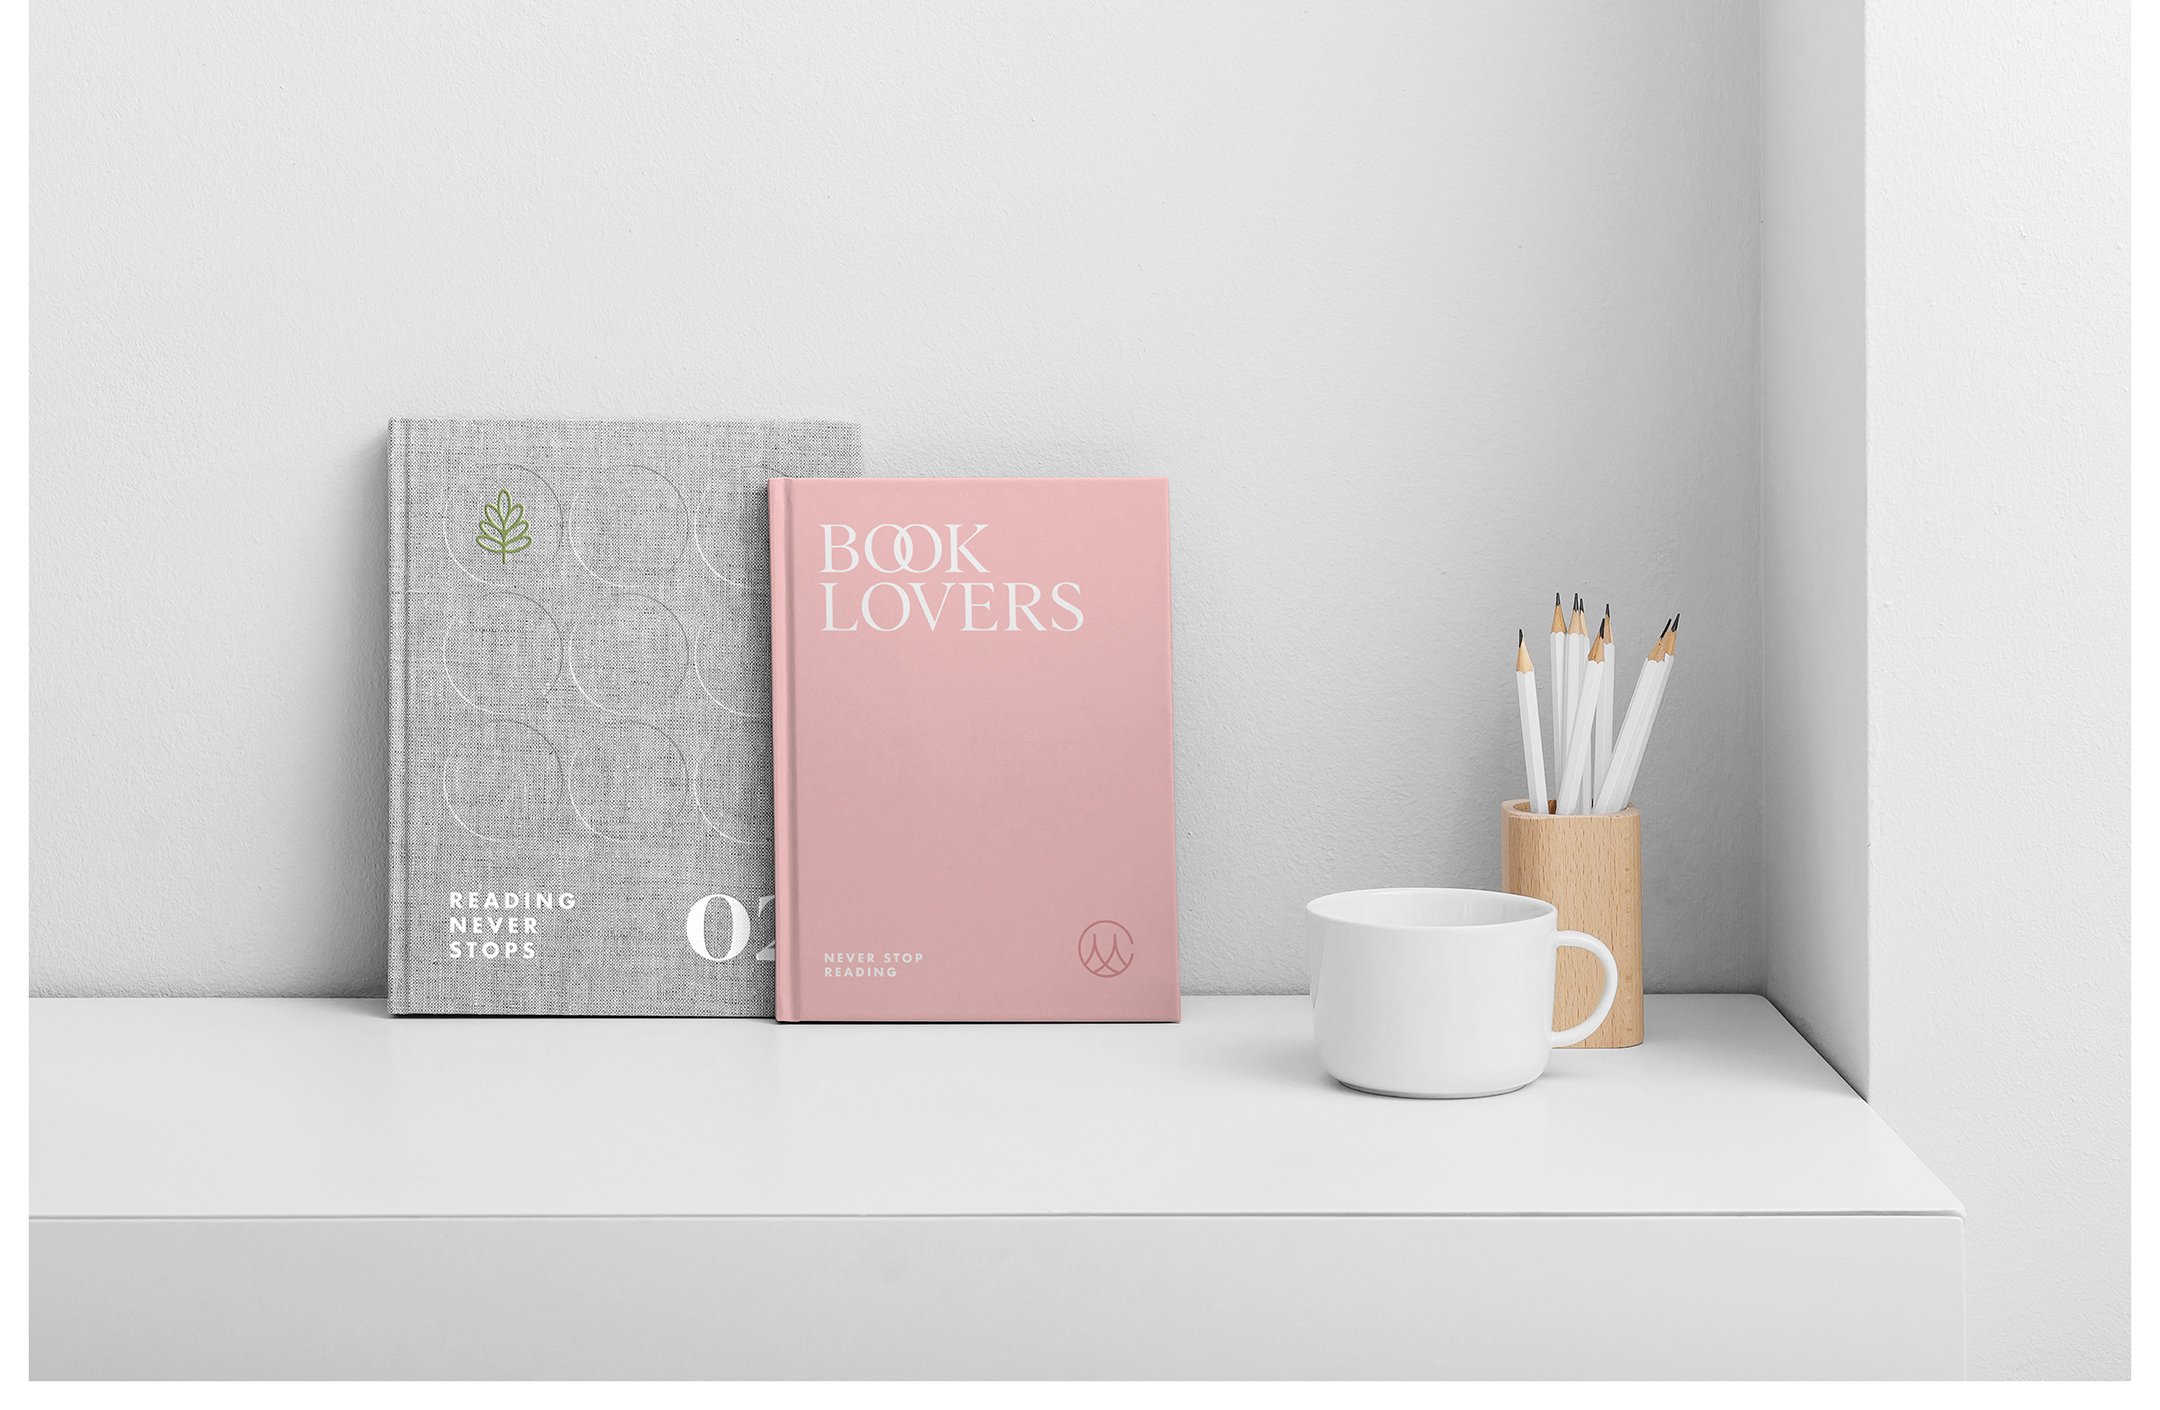 The Incredibly Diverse Mockups Collection